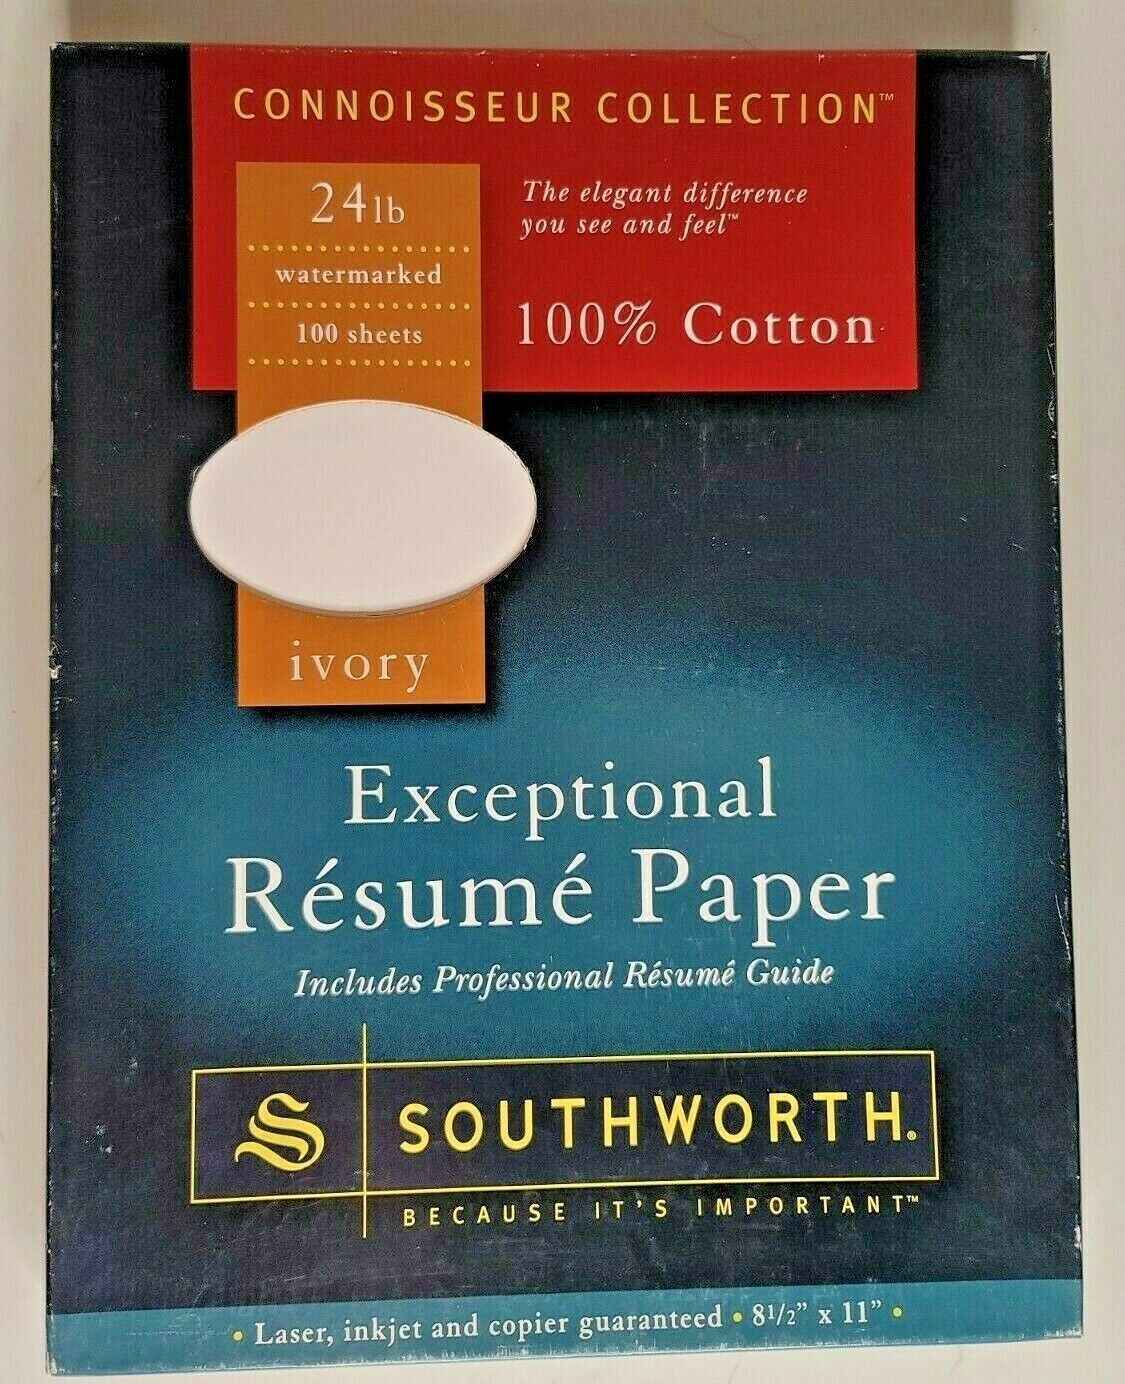 Southworth Ivory Resume Paper 24 lb 100% cotton 100 Sheets Watermarked 8.5 x 11"